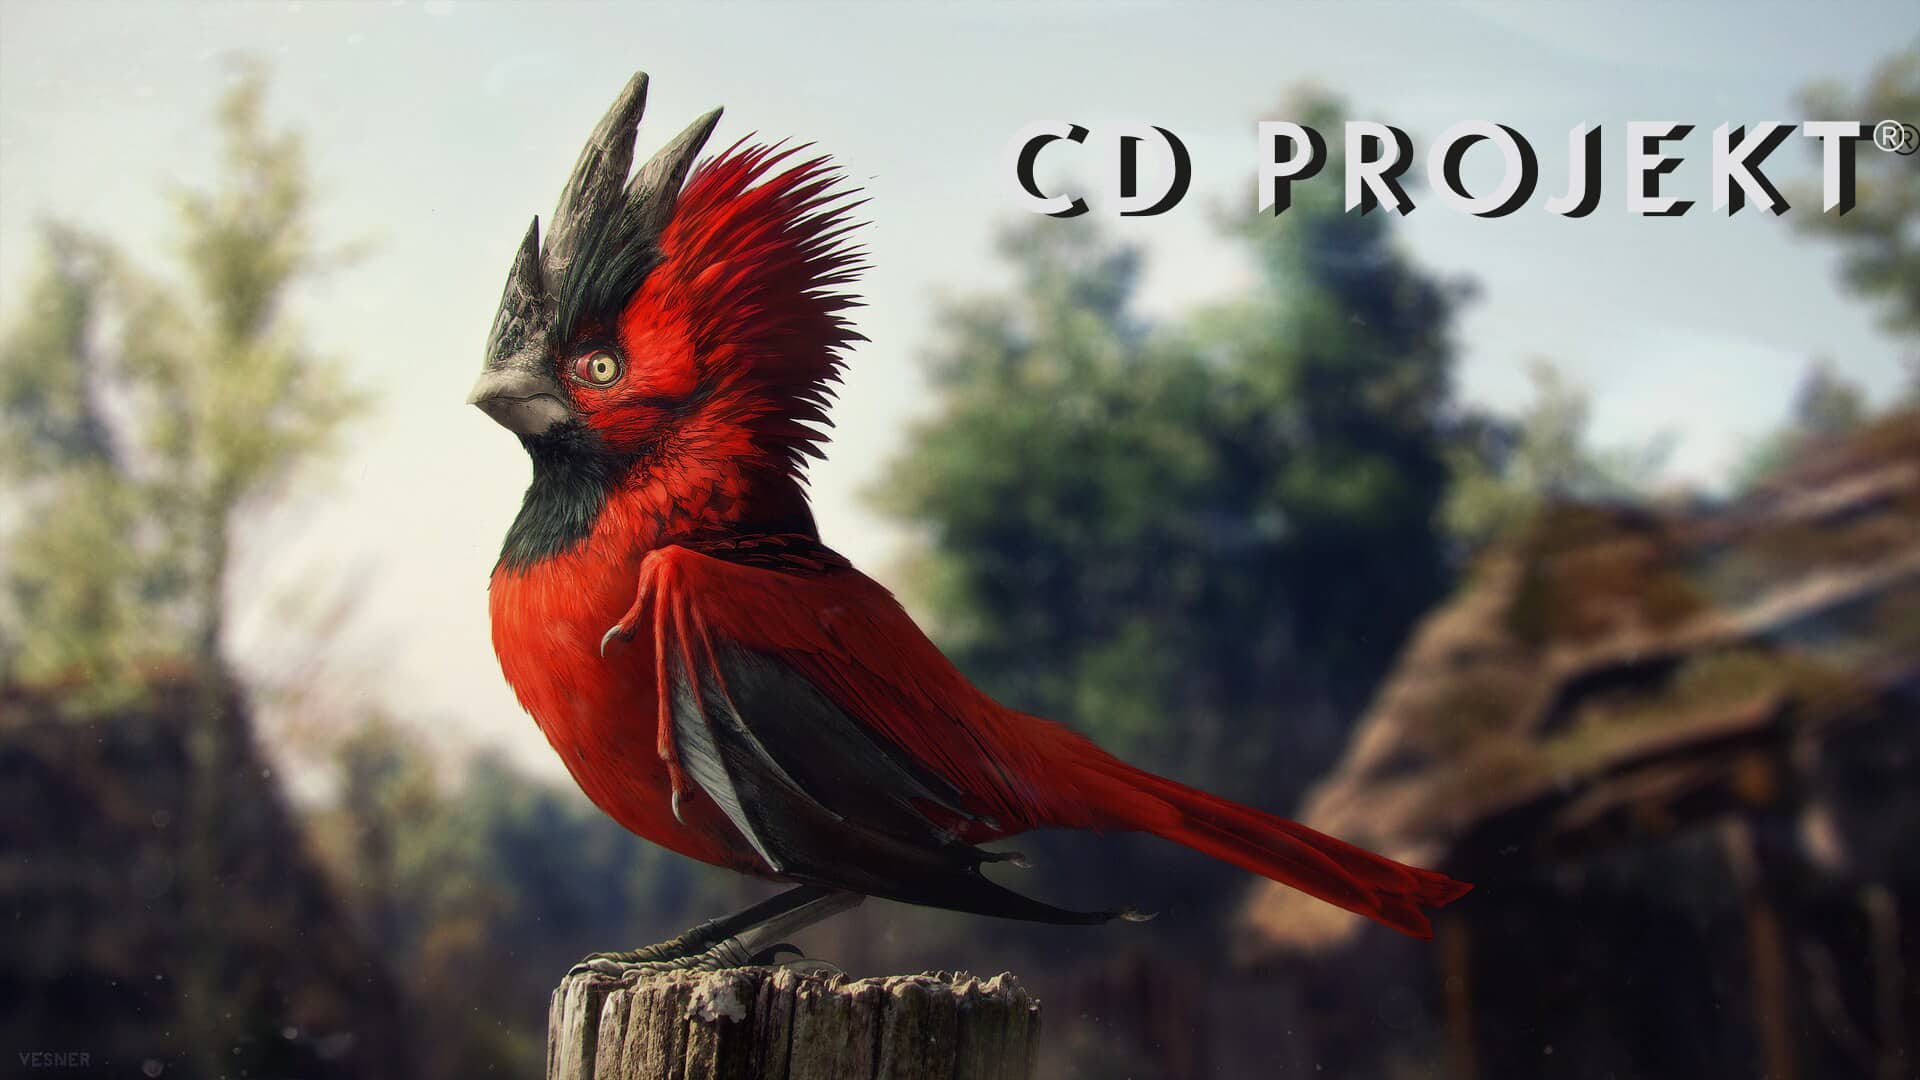 CD Projekt Red acquisition